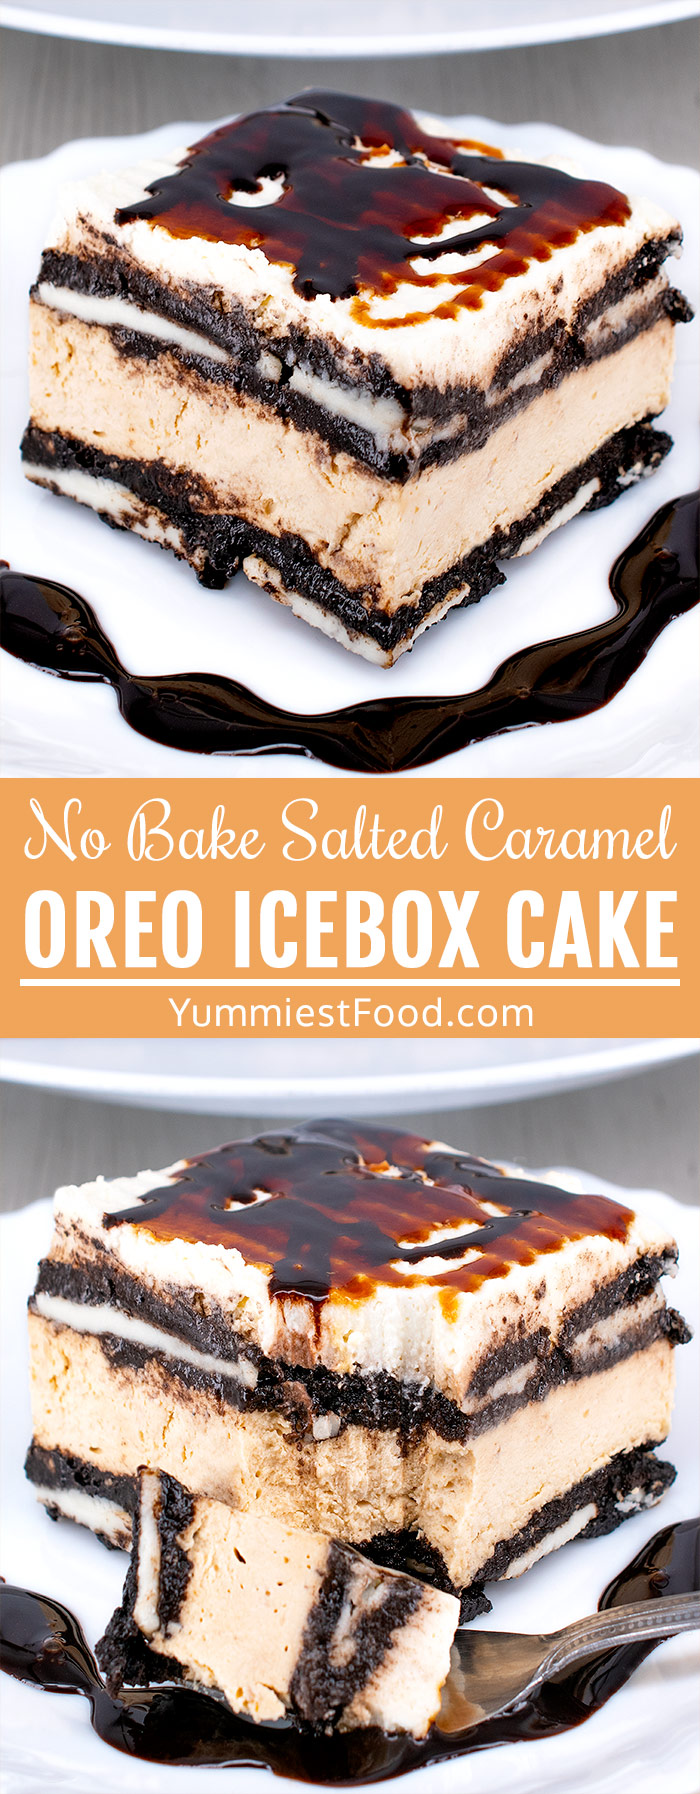 This easy No Bake Salted Caramel Oreo Icebox Cake recipe includes coffee, salted caramel, cream cheese, and delicious Oreo cookies